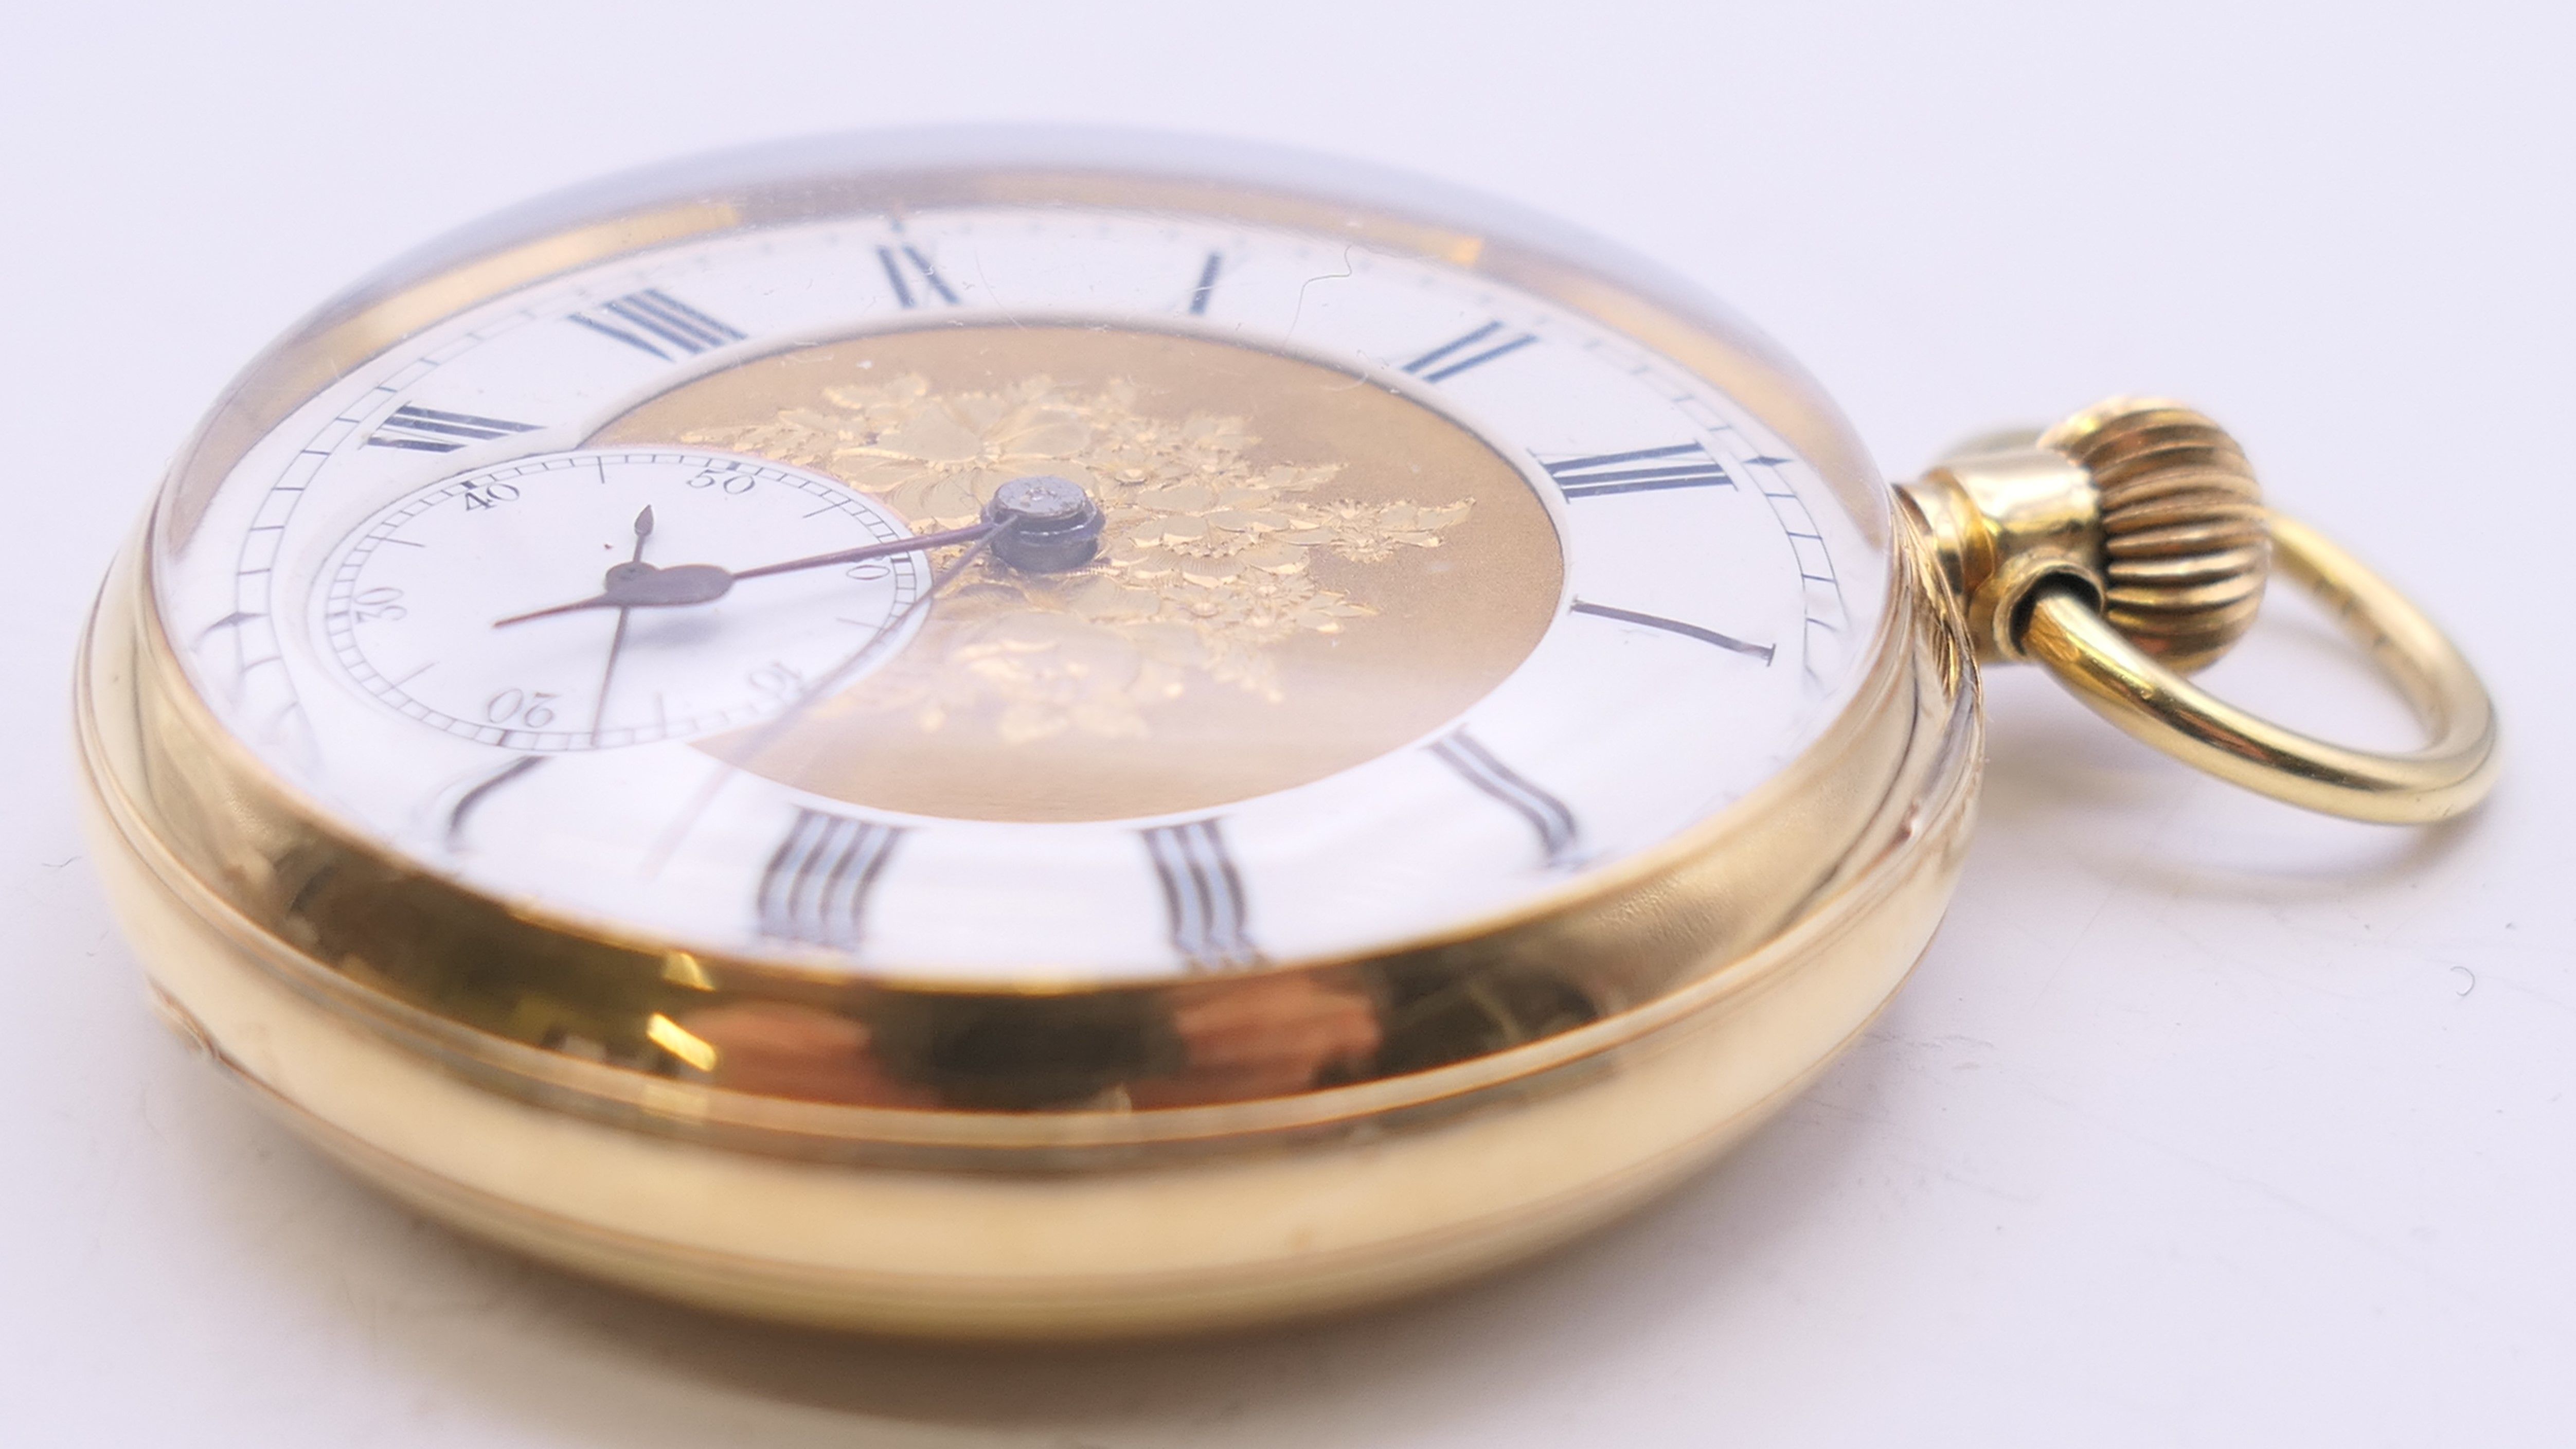 An 18 ct gold pocket watch with florally engraved dial, serial number 15514. 4.25 diameter. - Image 4 of 8